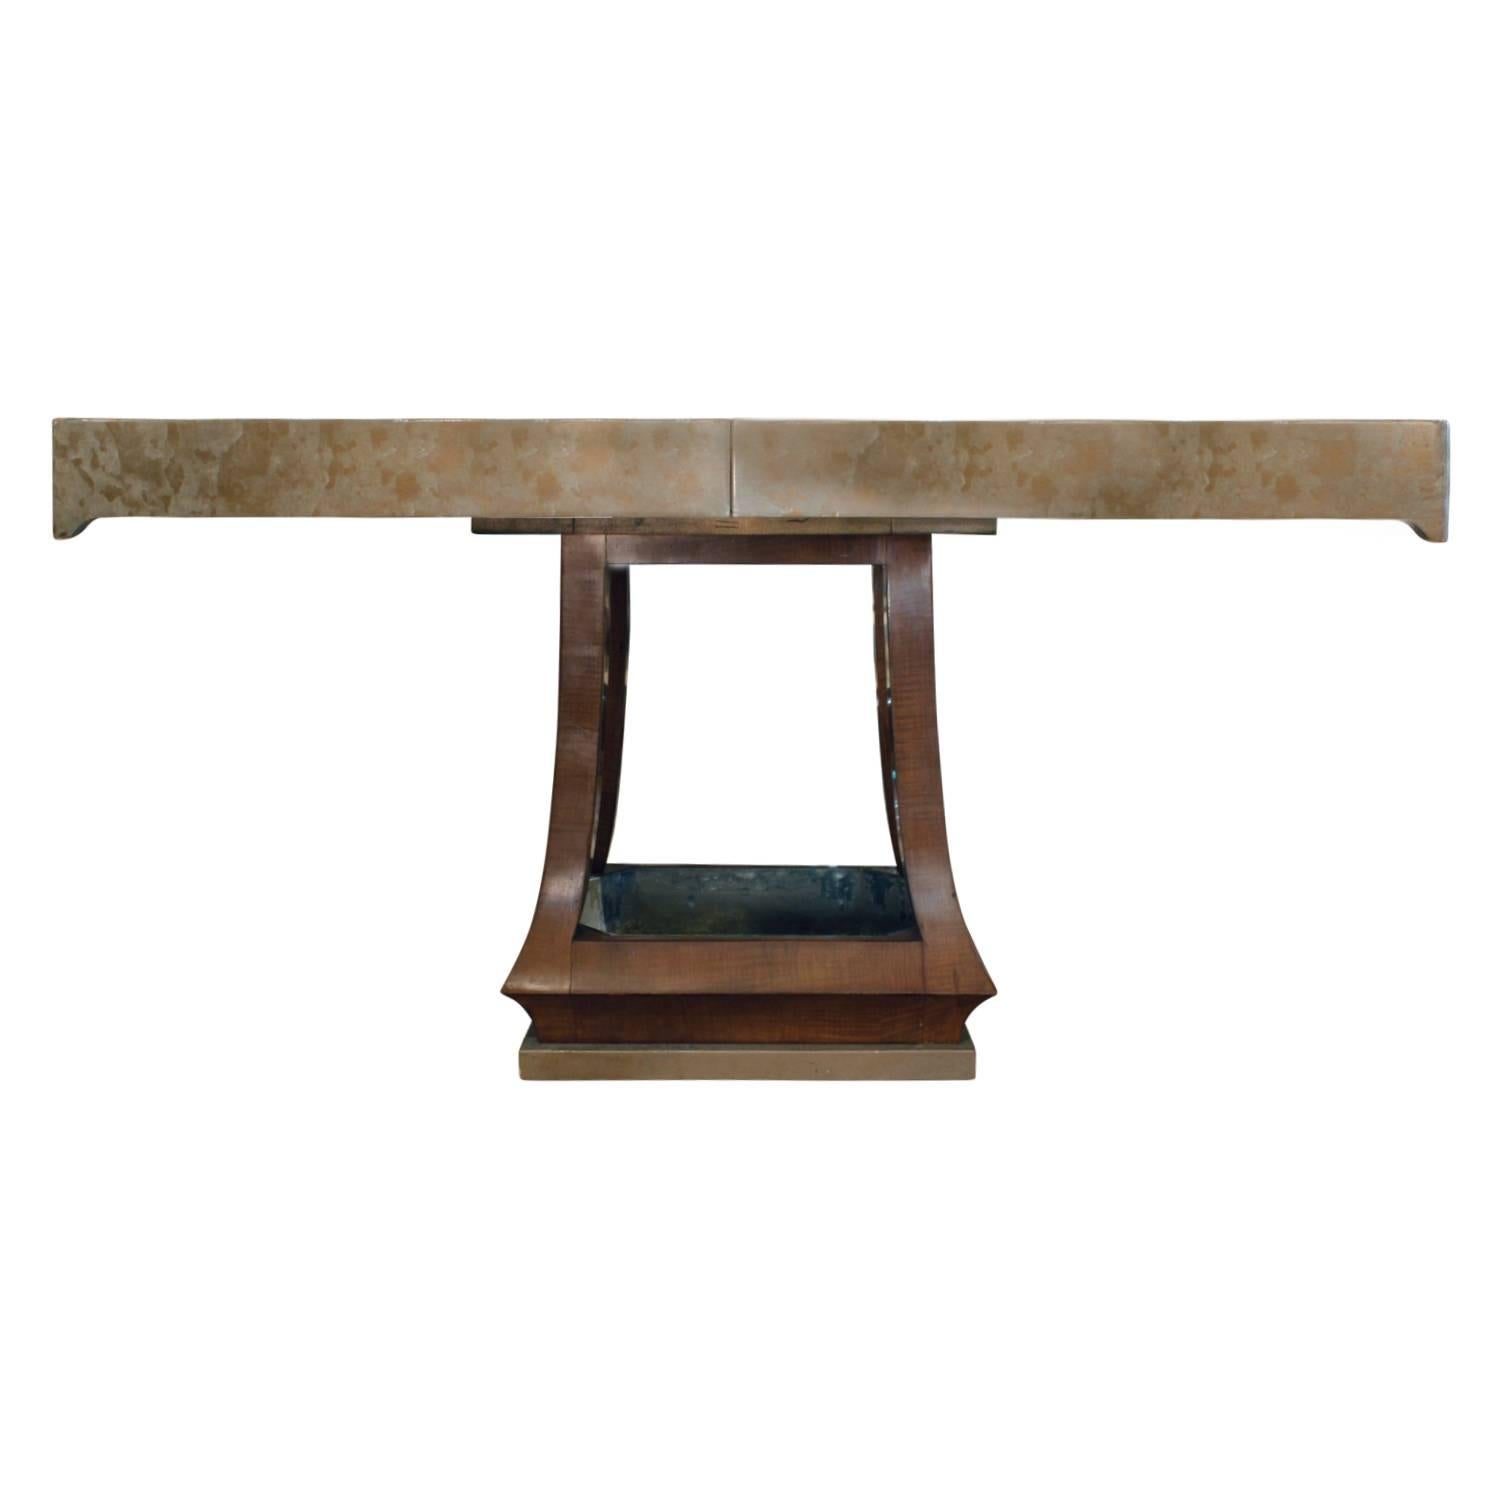 Hand-Crafted James Mont Asian Style Dining Table with Custom Oil Lacquer Finish, 1940s